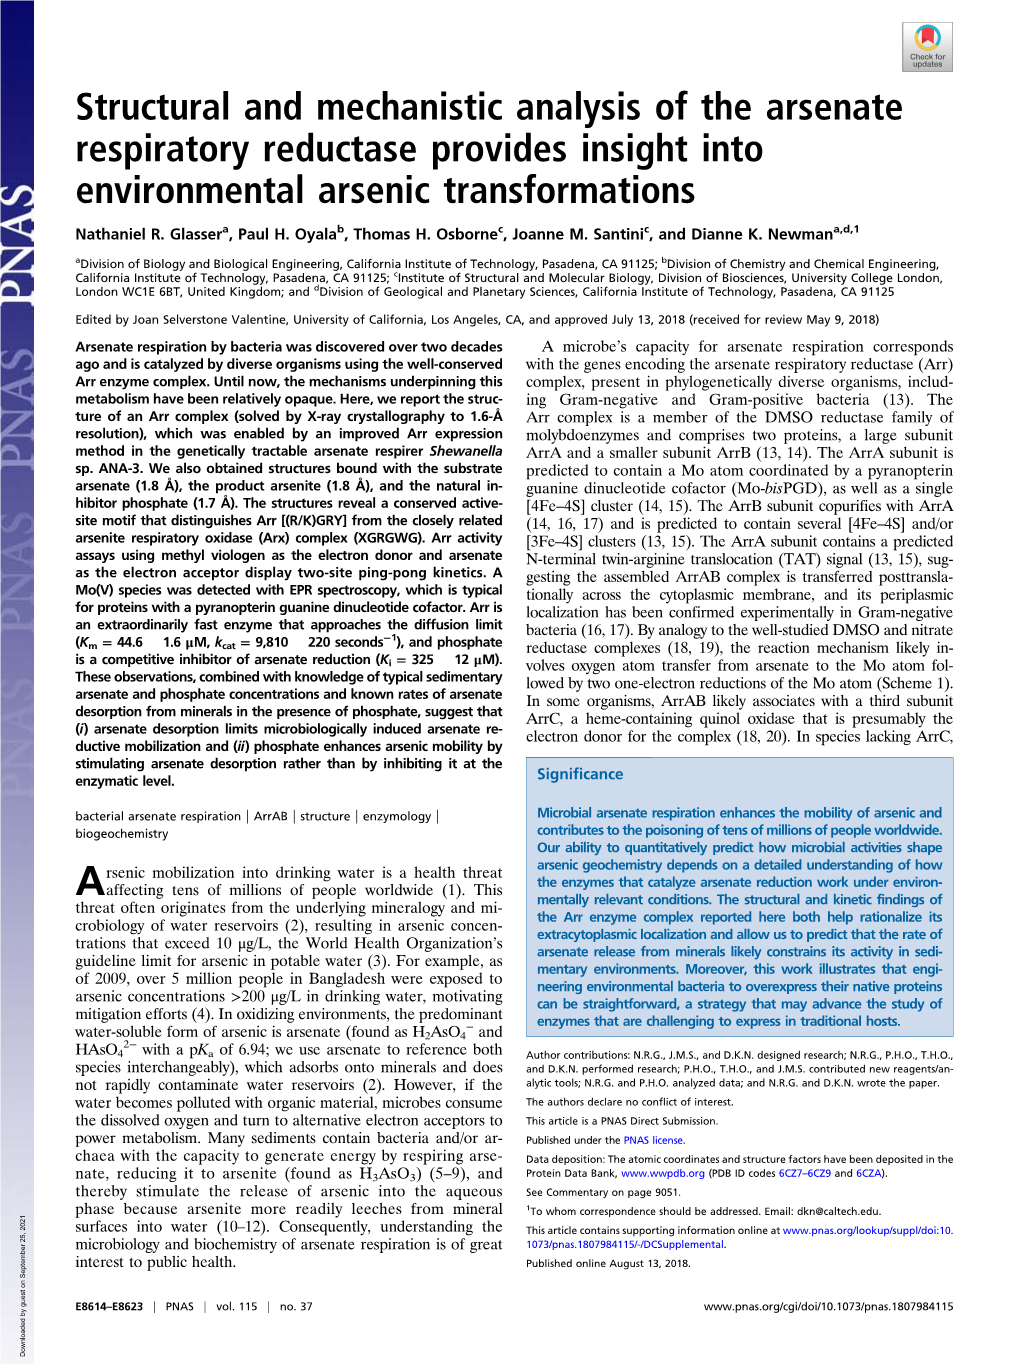 Structural and Mechanistic Analysis of the Arsenate Respiratory Reductase Provides Insight Into Environmental Arsenic Transformations